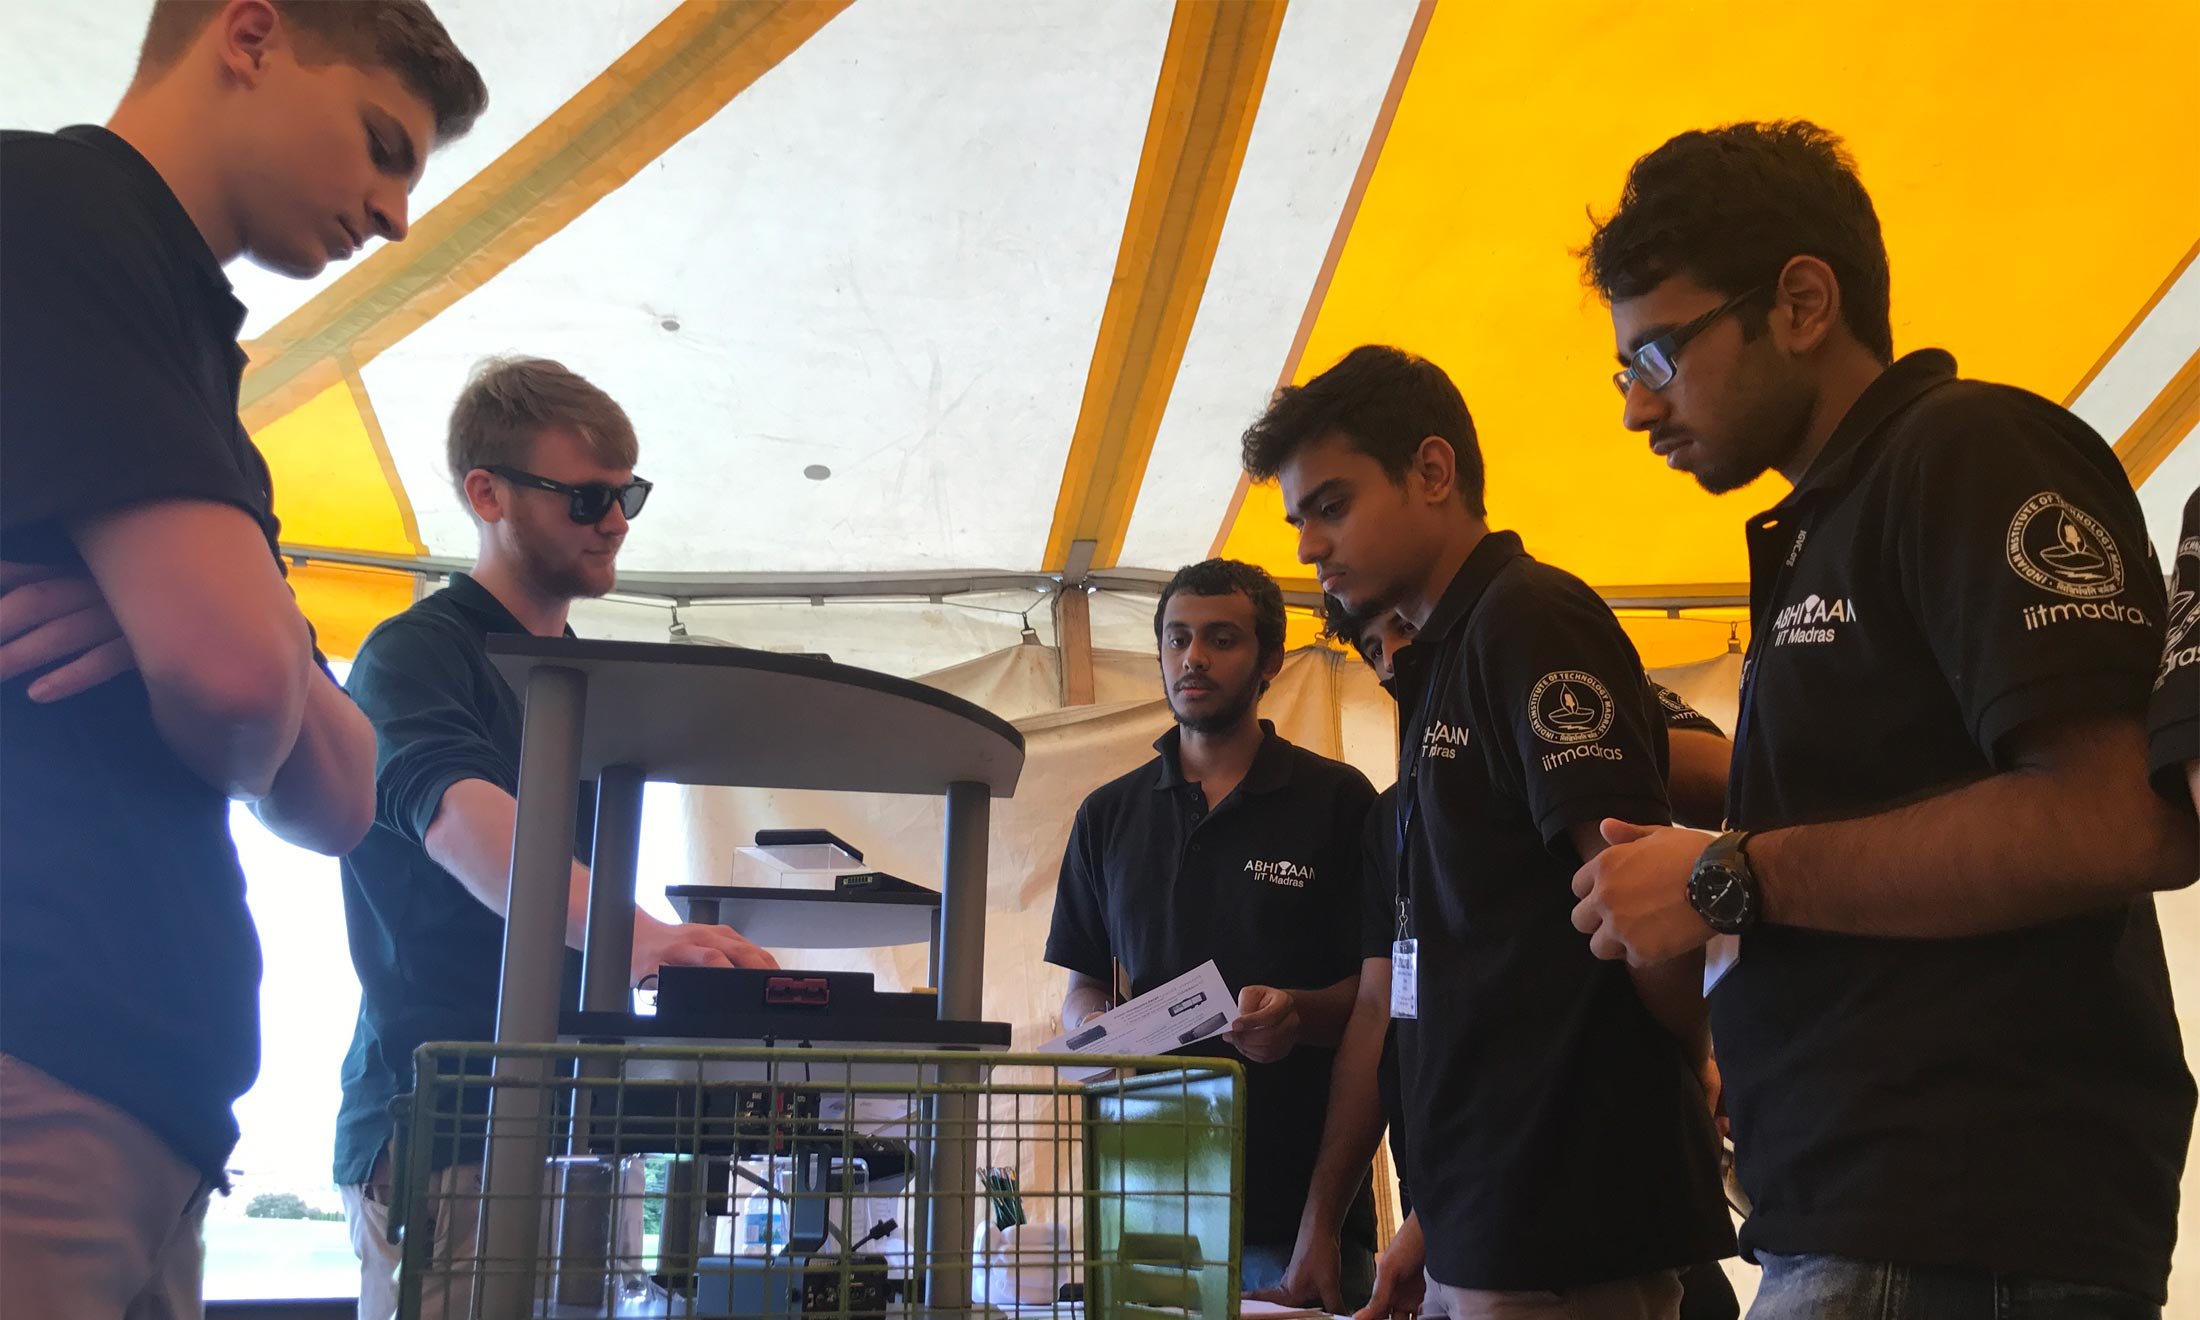 Students discuss their projects for the IGVC competition at Oakland University under a yellow tent